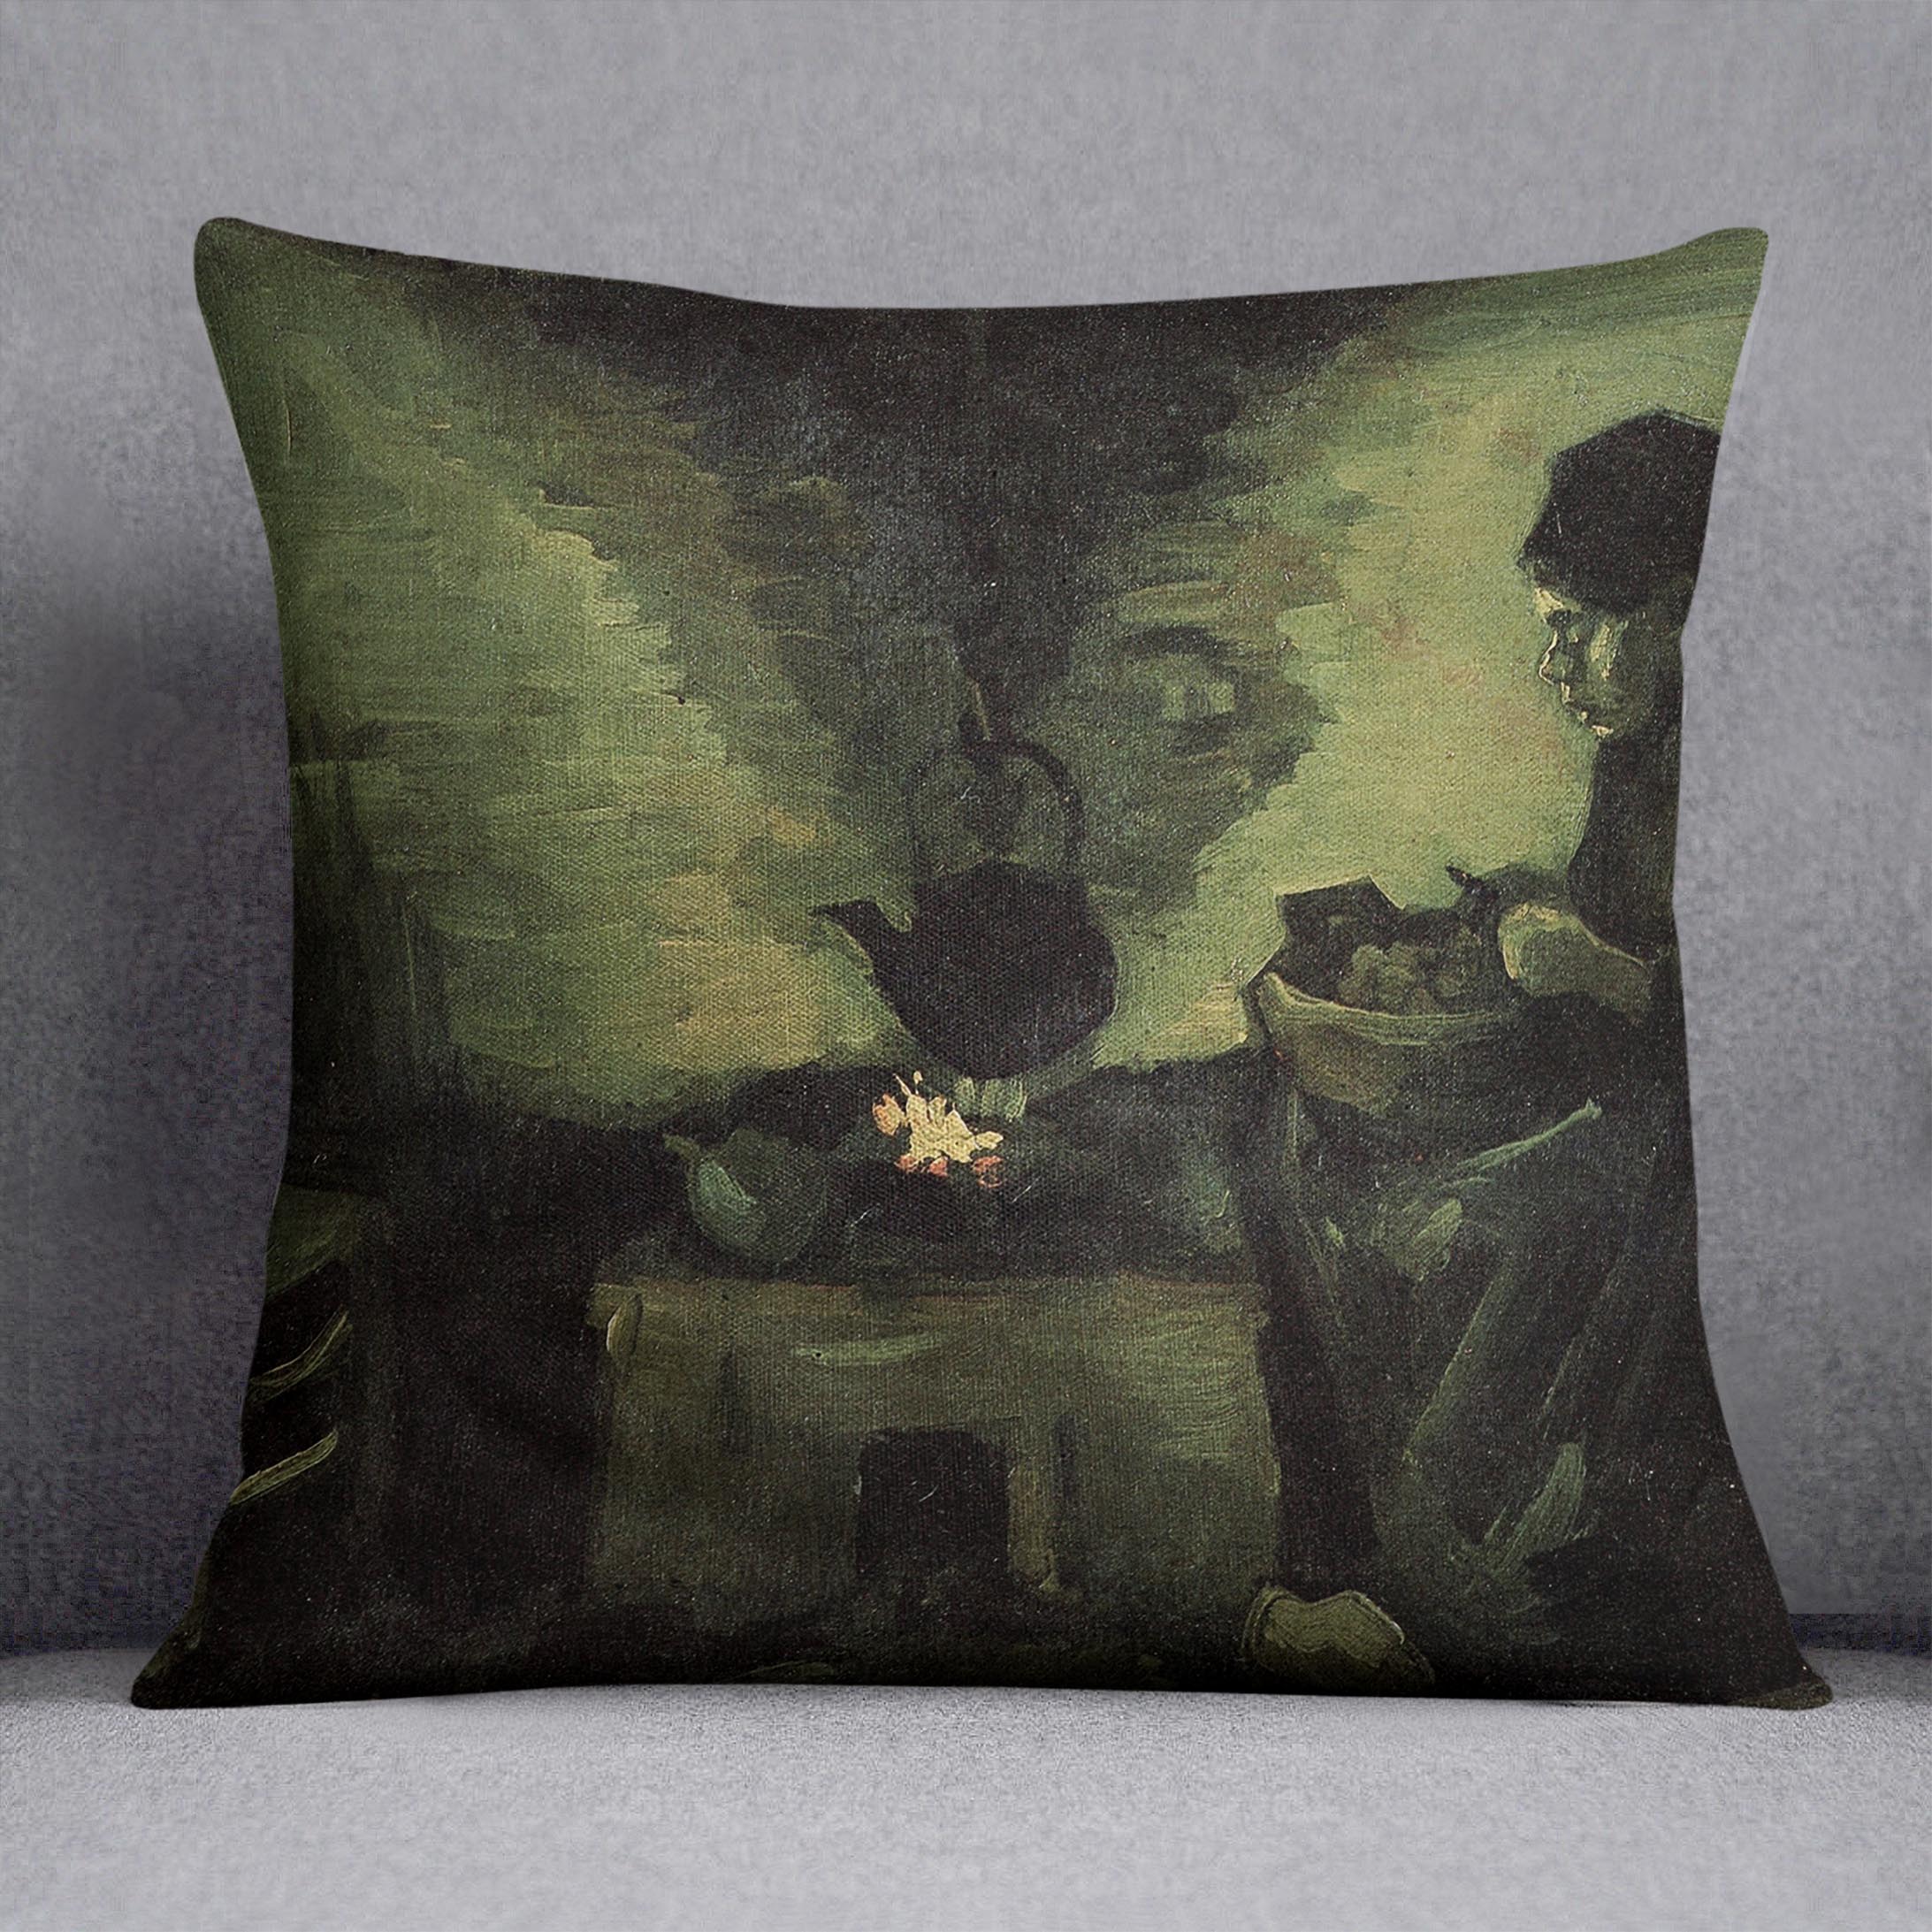 Peasant Woman by the Fireplace by Van Gogh Cushion